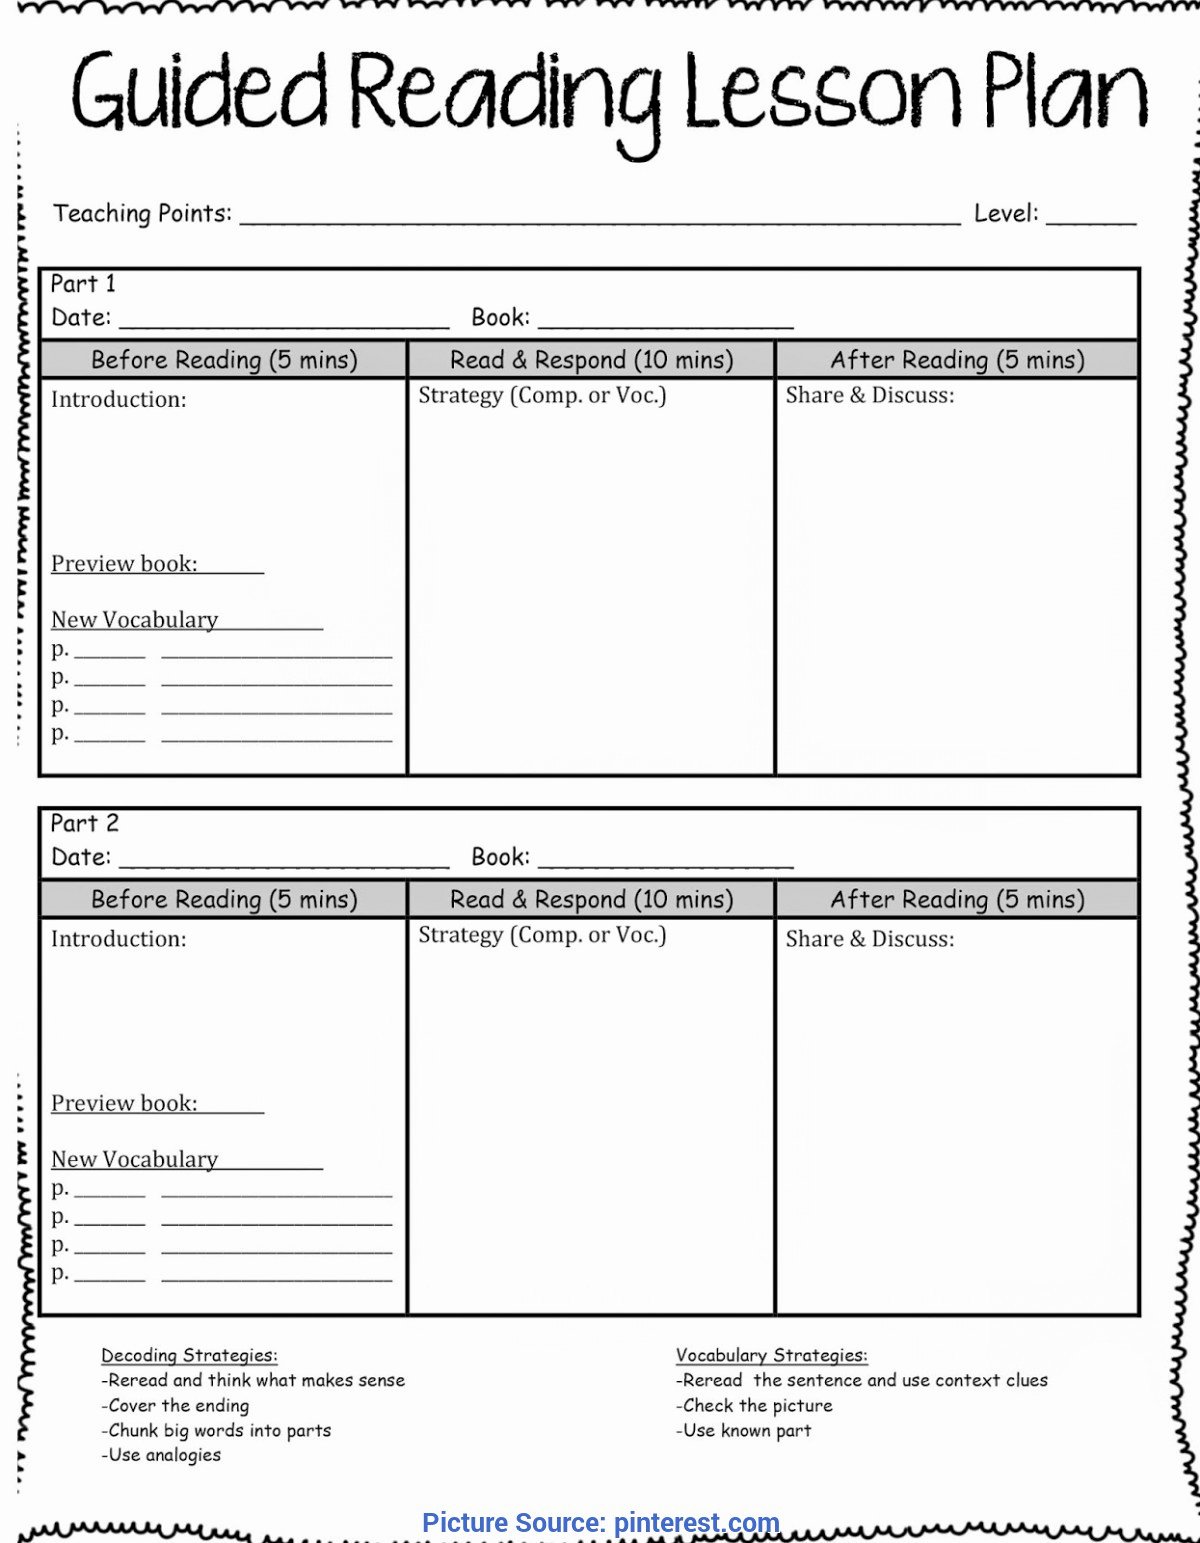 Literacy Lesson Plan Template Lovely Unusual Reading Lesson Plan Ks2 Editable Guided Reading